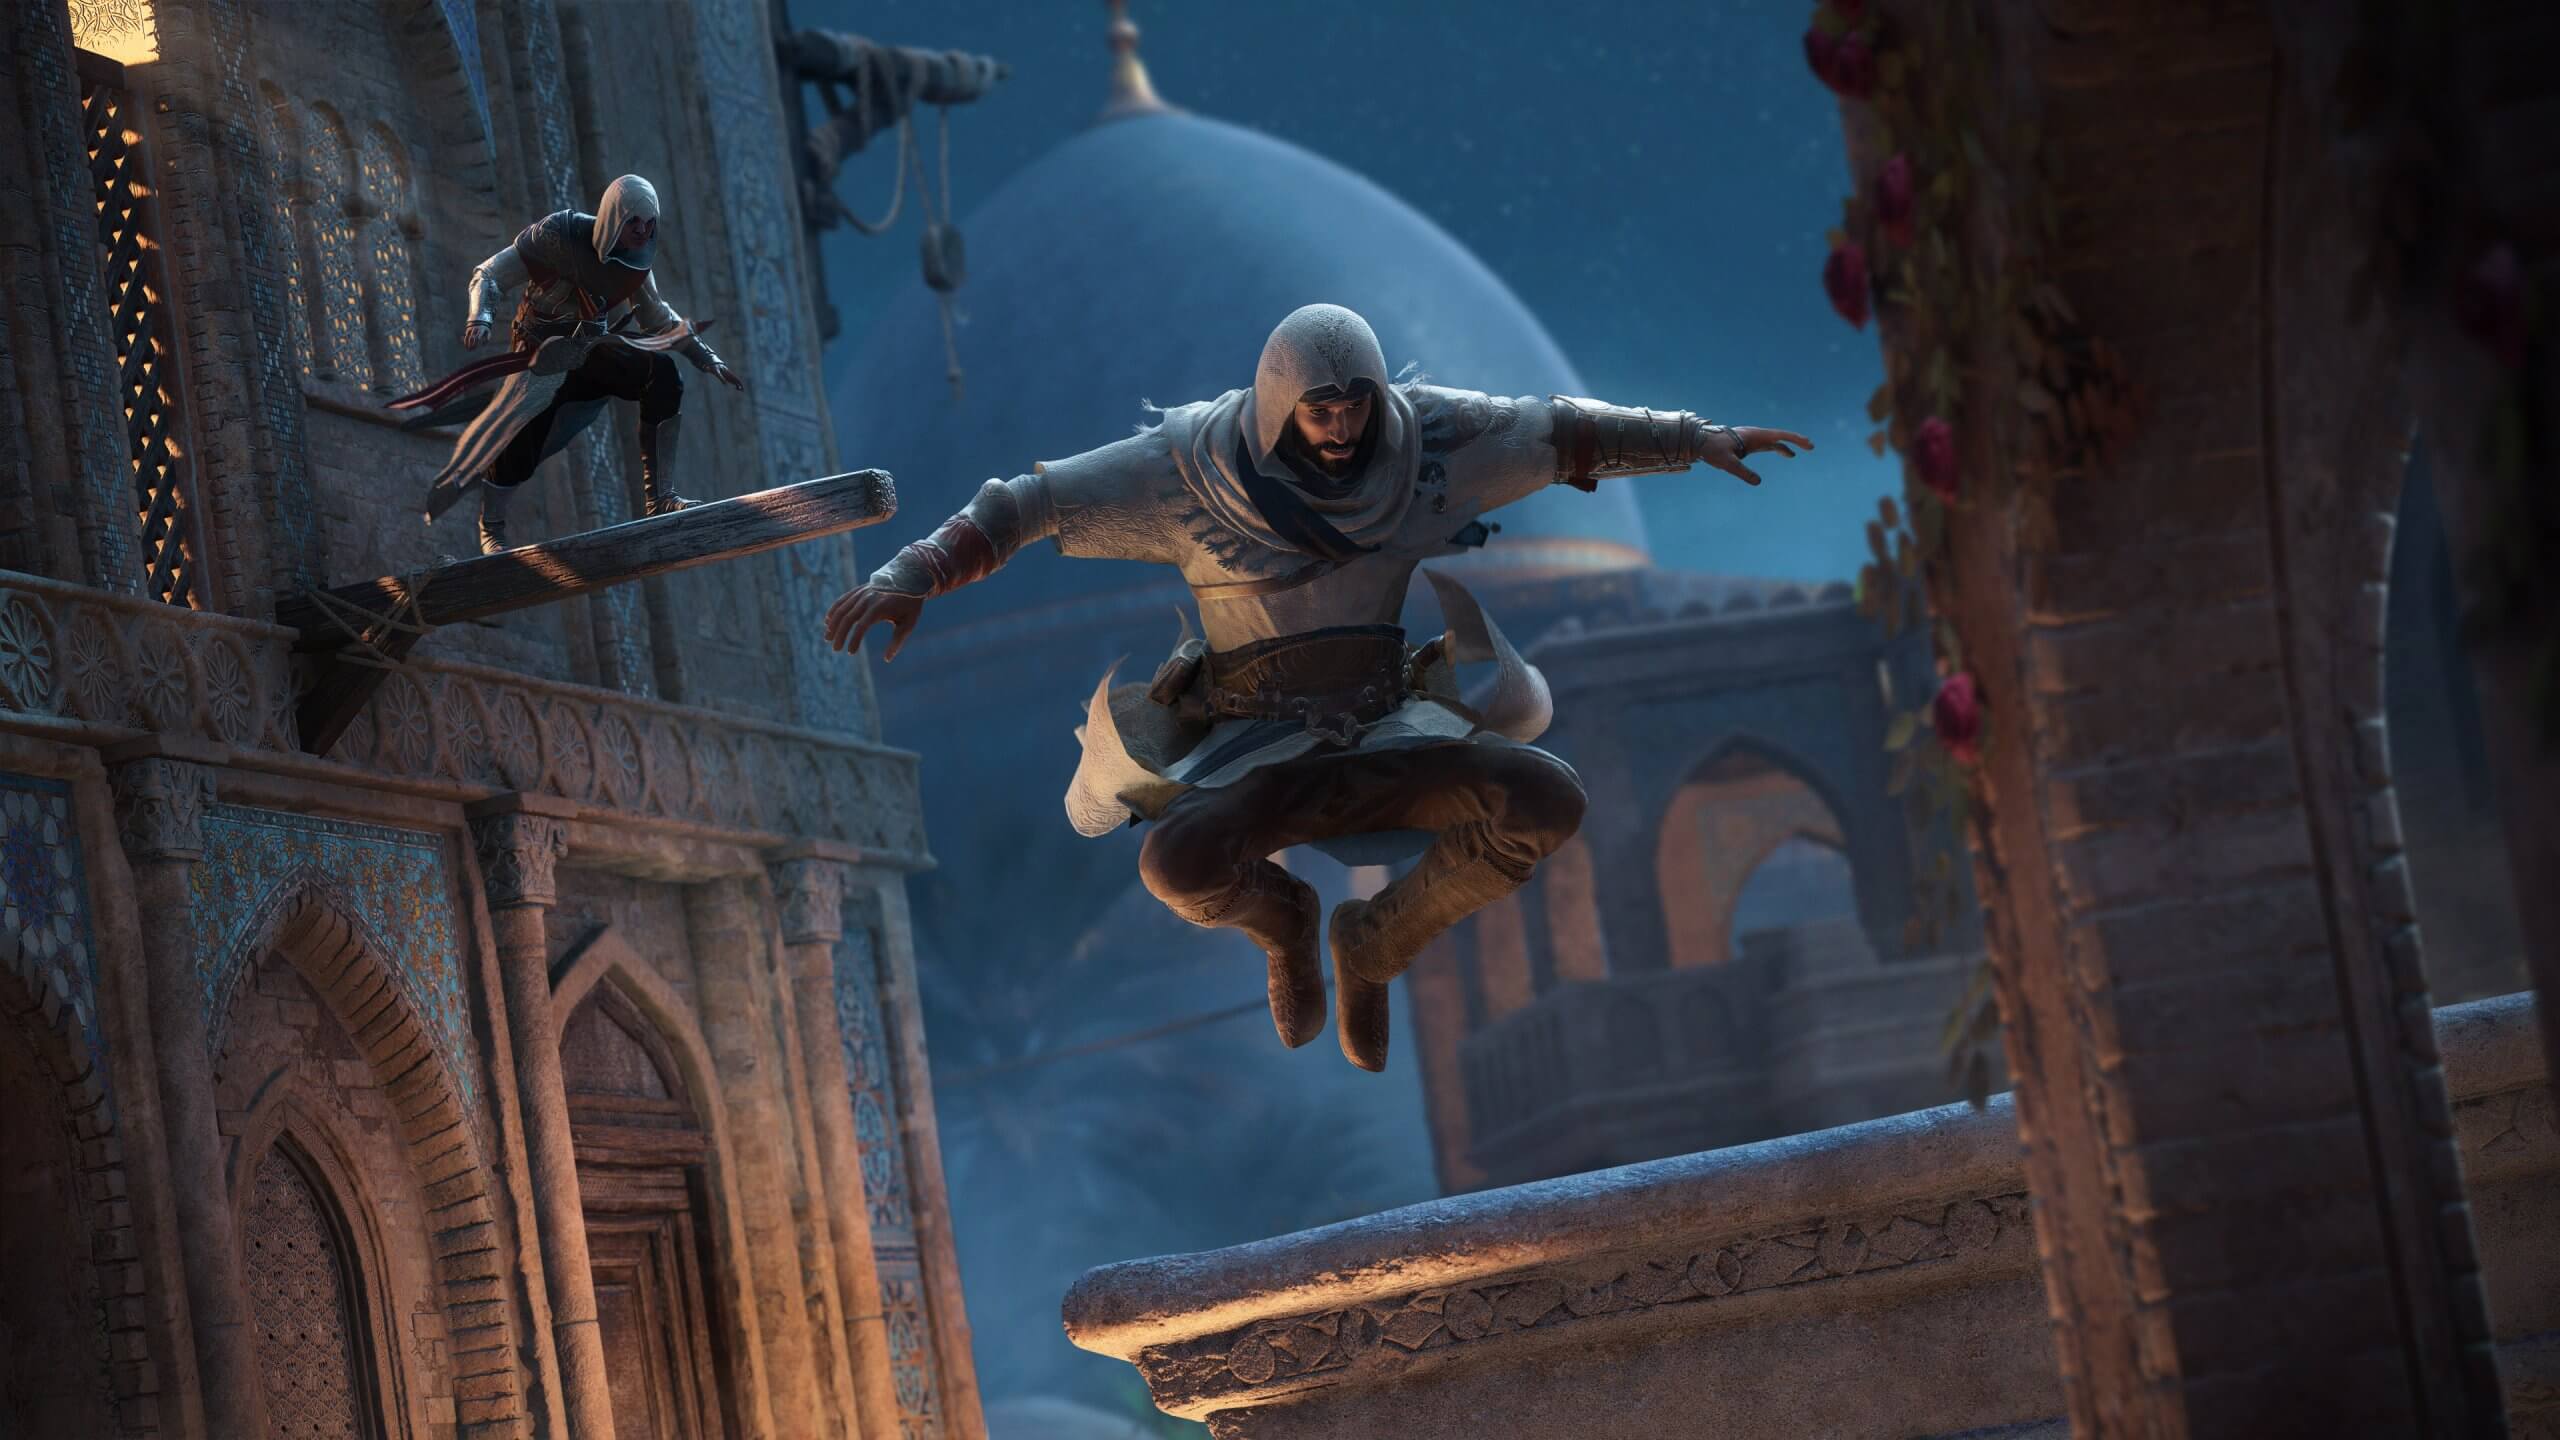 Assassin's Creed Valhalla WILL NOT Have a Steam Release + New